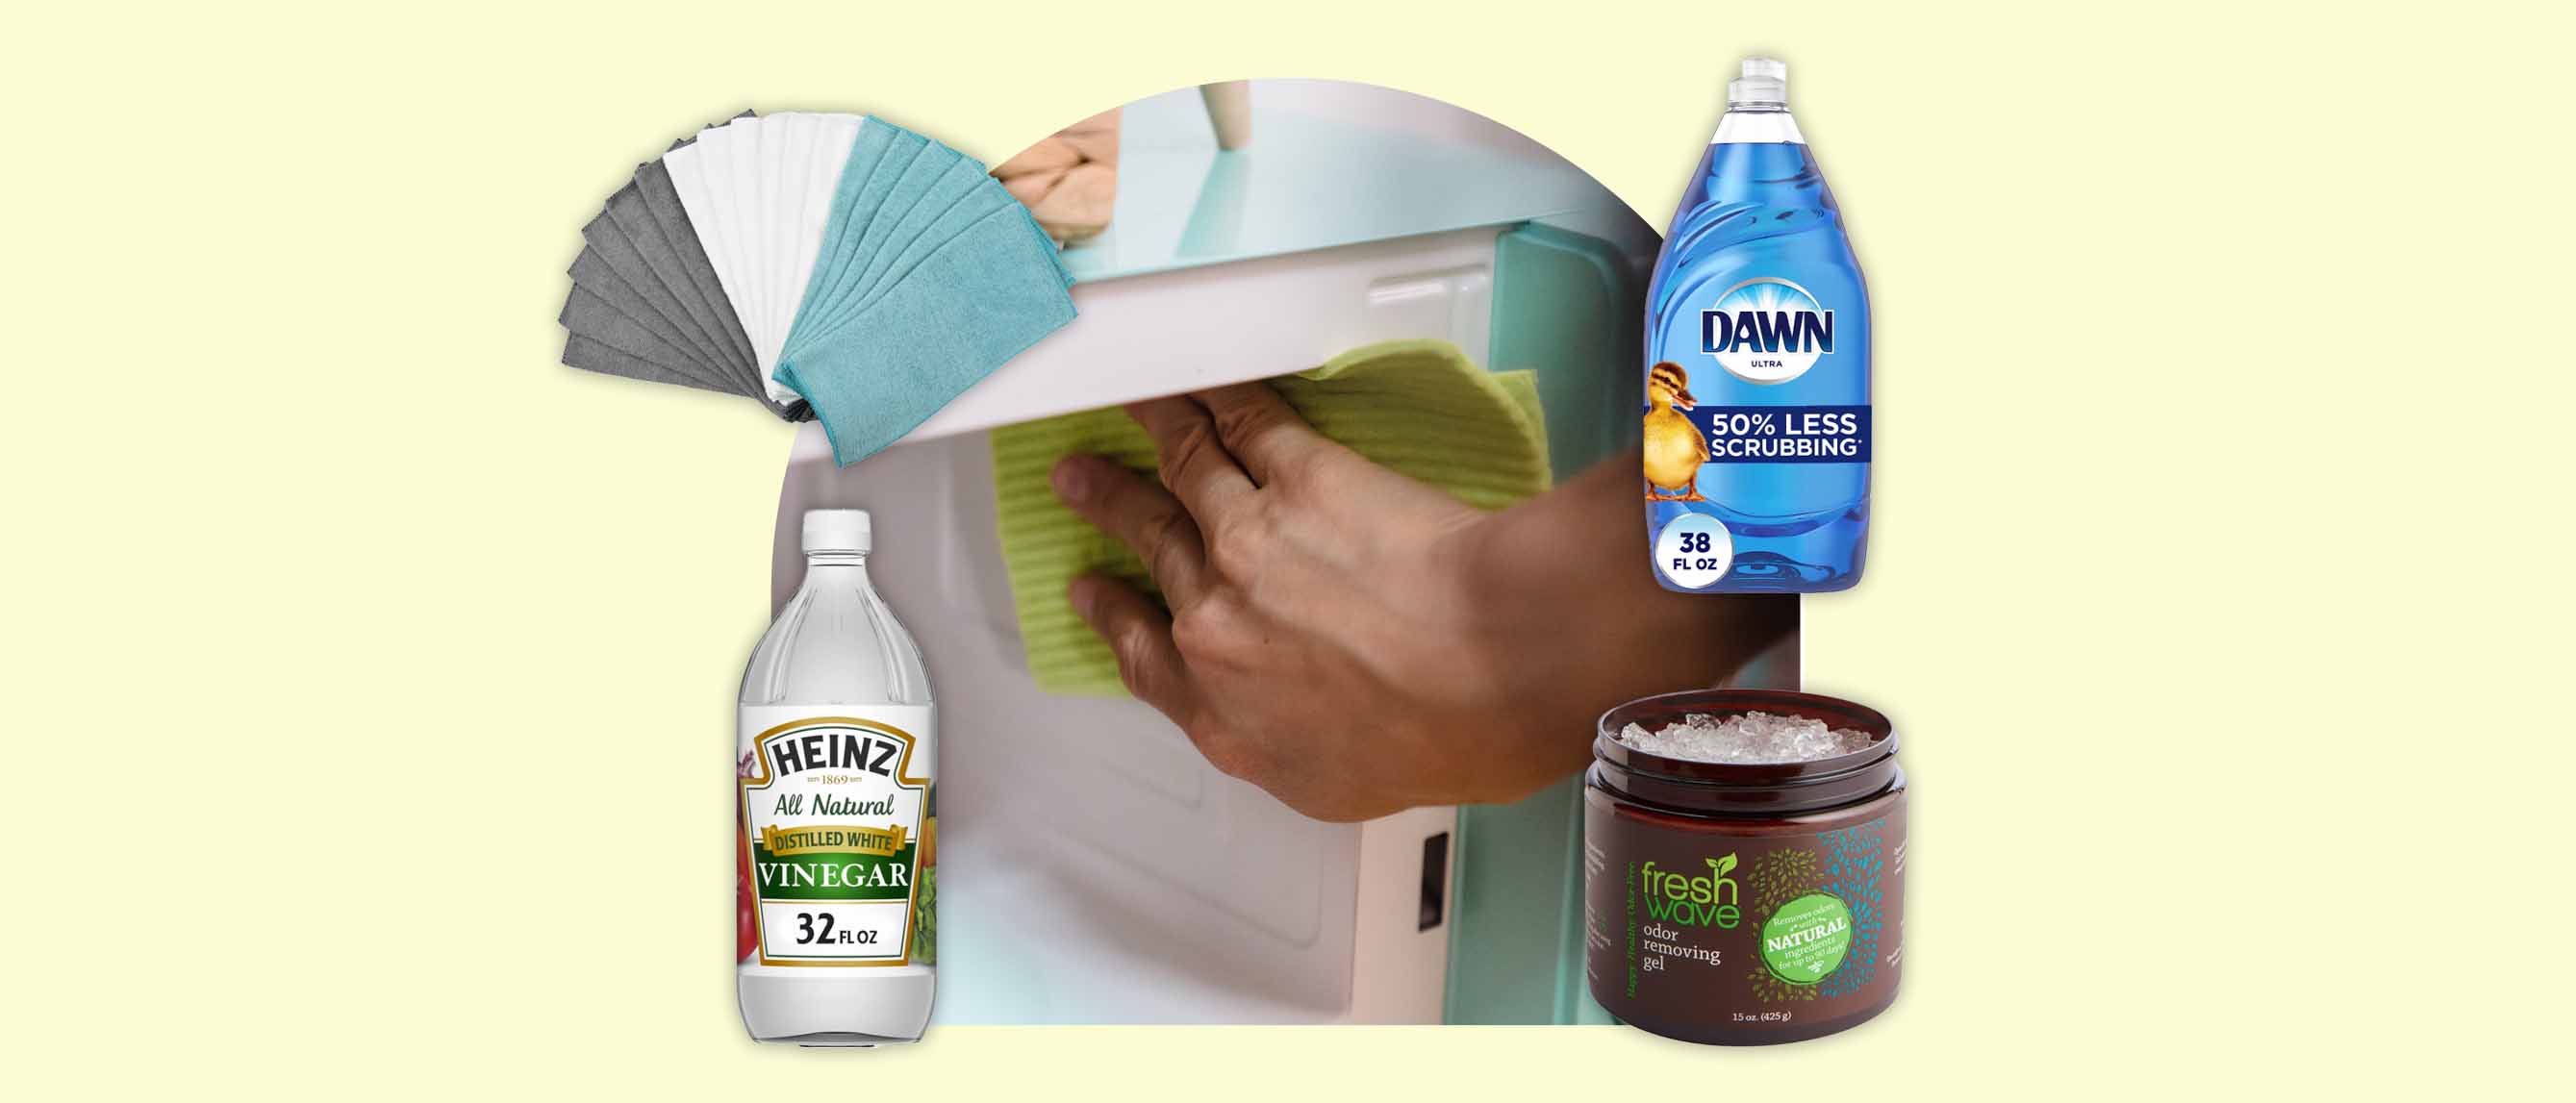 hand wiping the inside of a microwave with a cloth surrounded by cleaning cloths, image white vinegar, dawn liquid soap and odor-removing gel